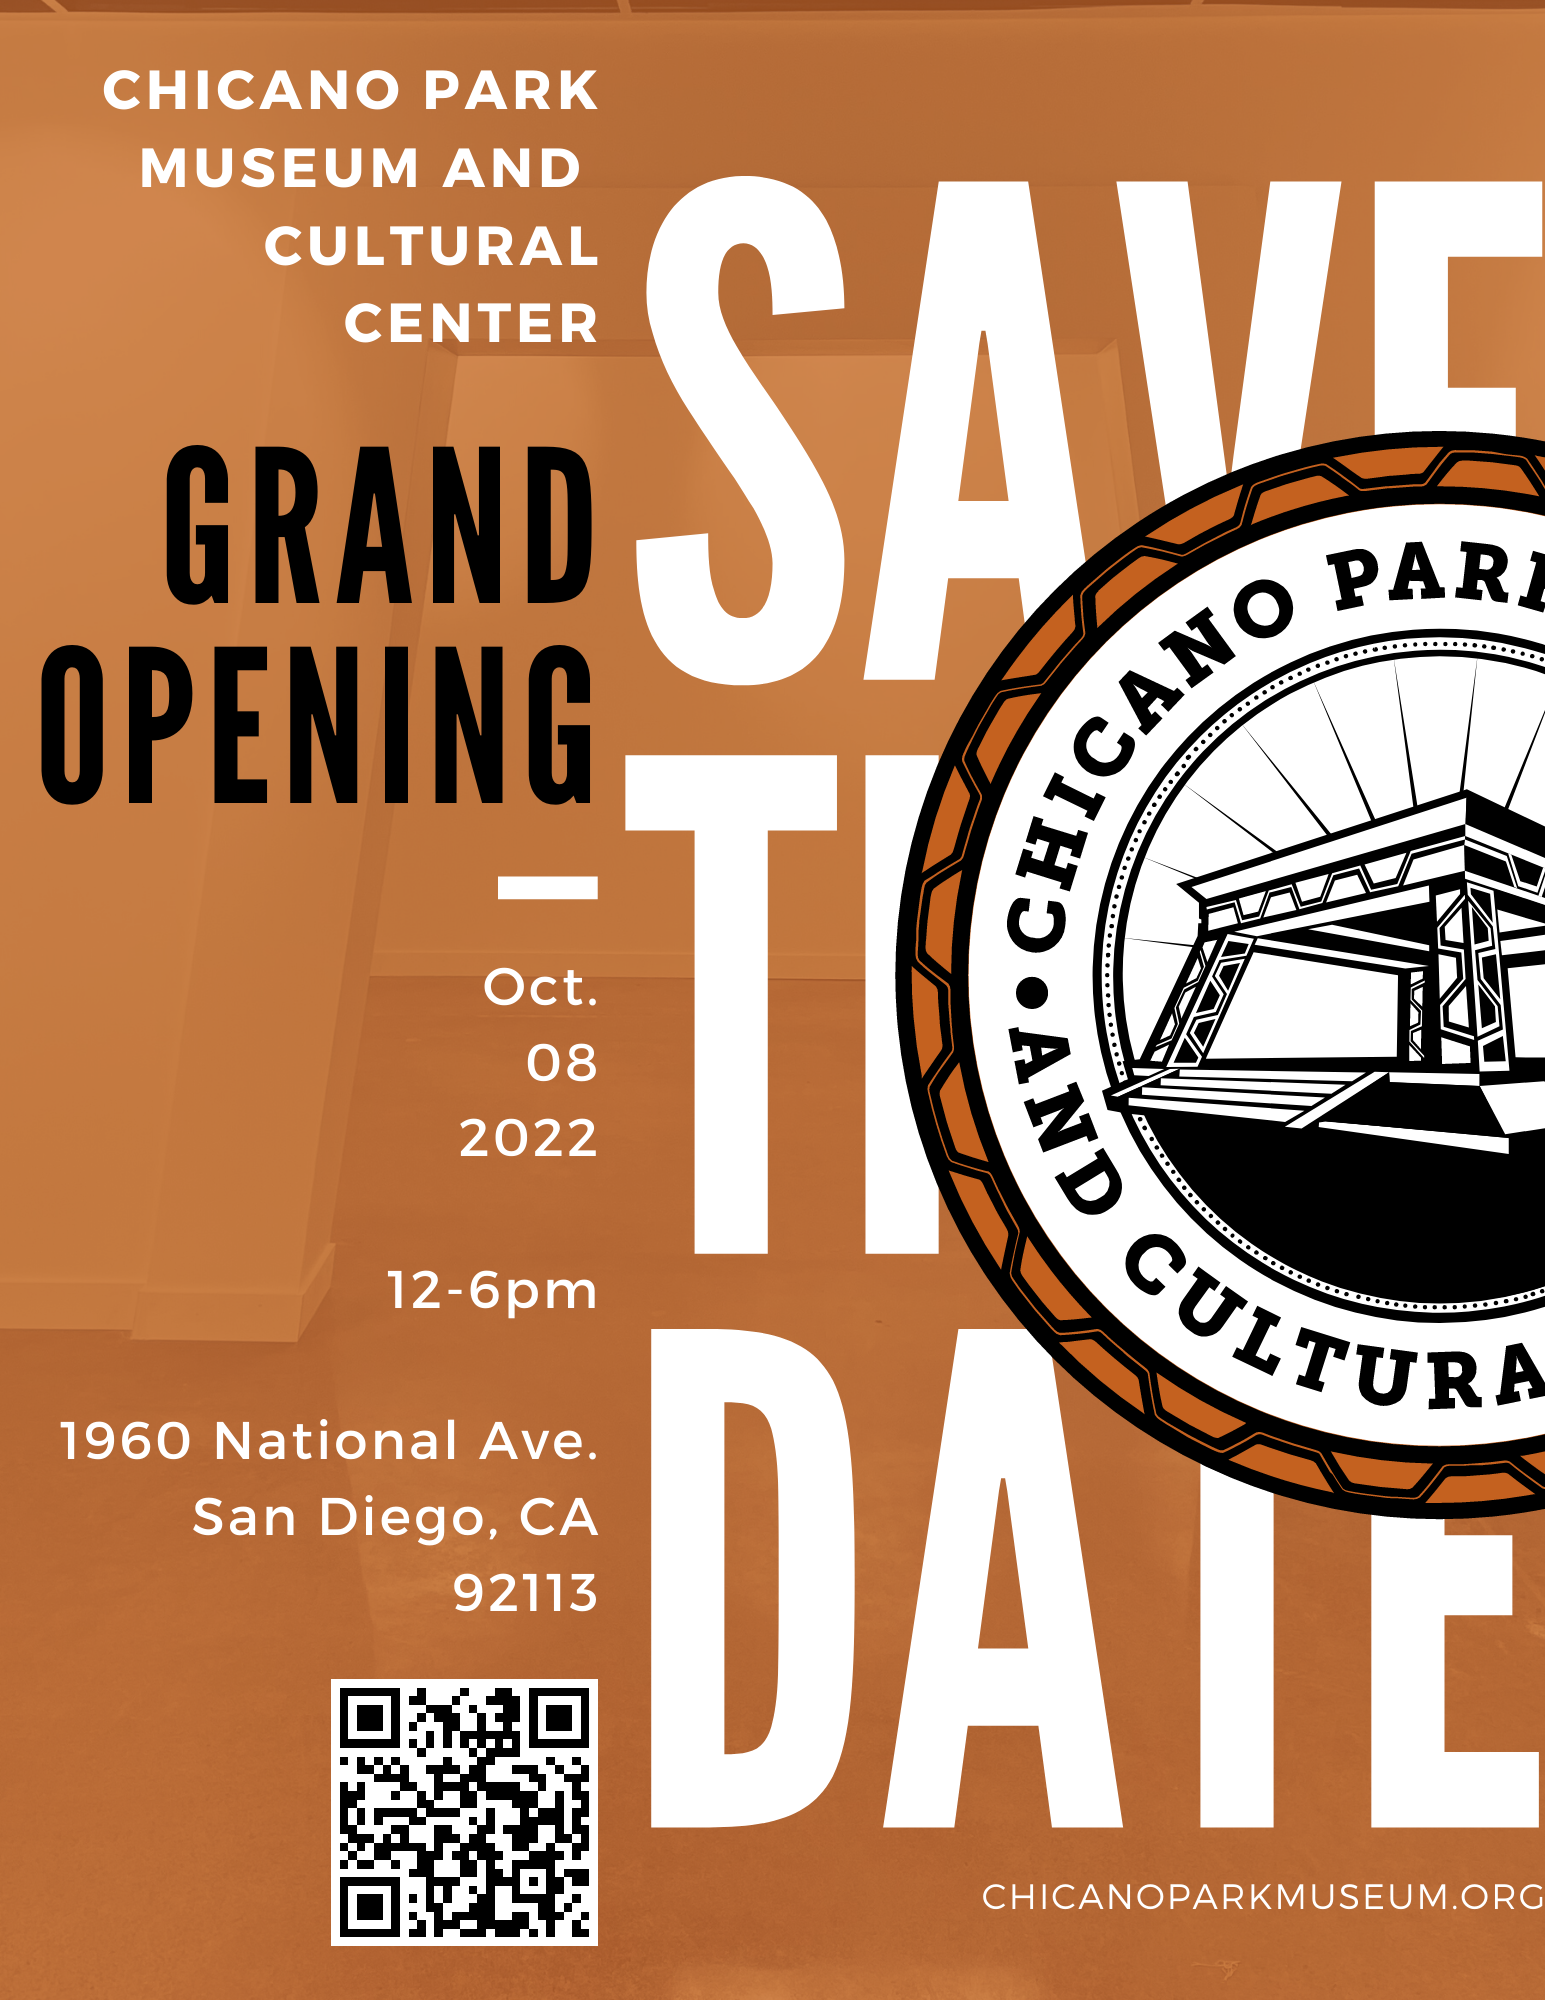 Chicano Park Grand opening.